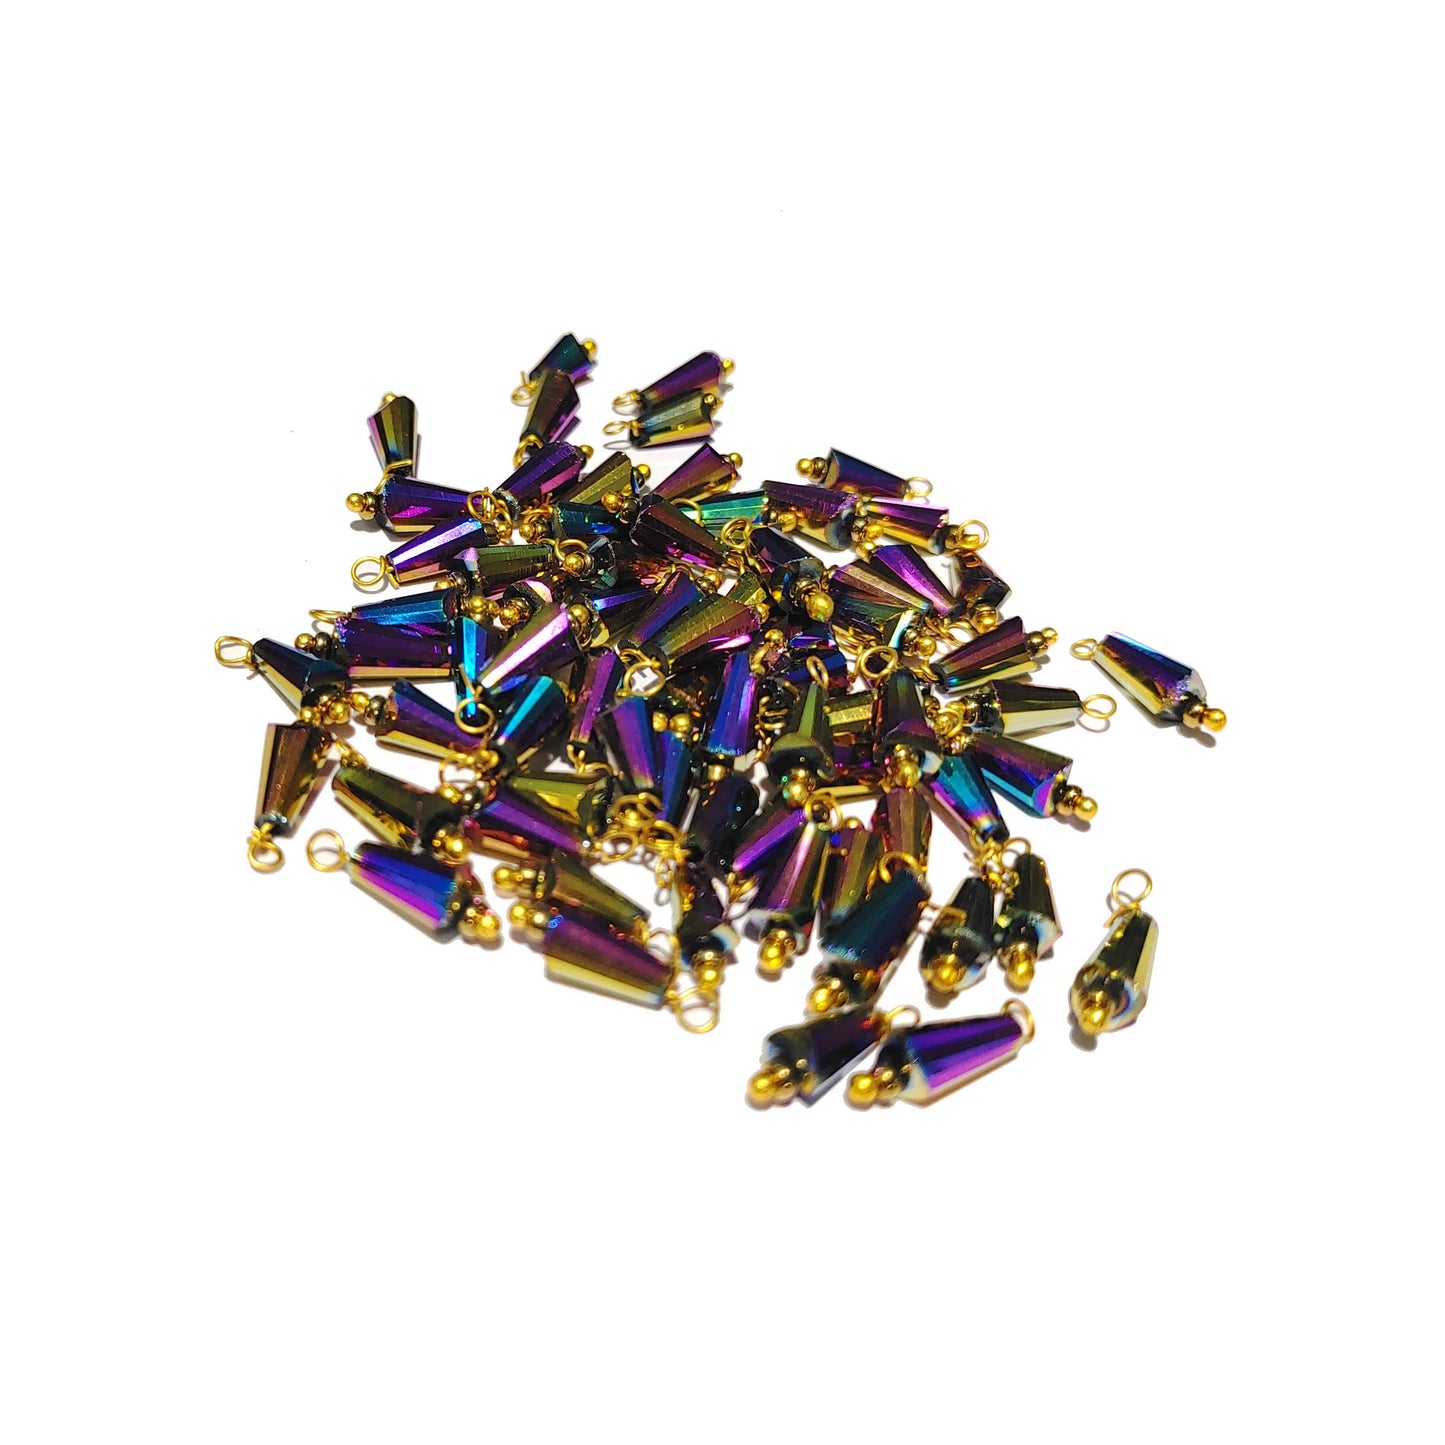 Indian Petals 4x8 Pencil Shaped Glass Bead with Drop for Craft Or Decor - Mix Color -11752